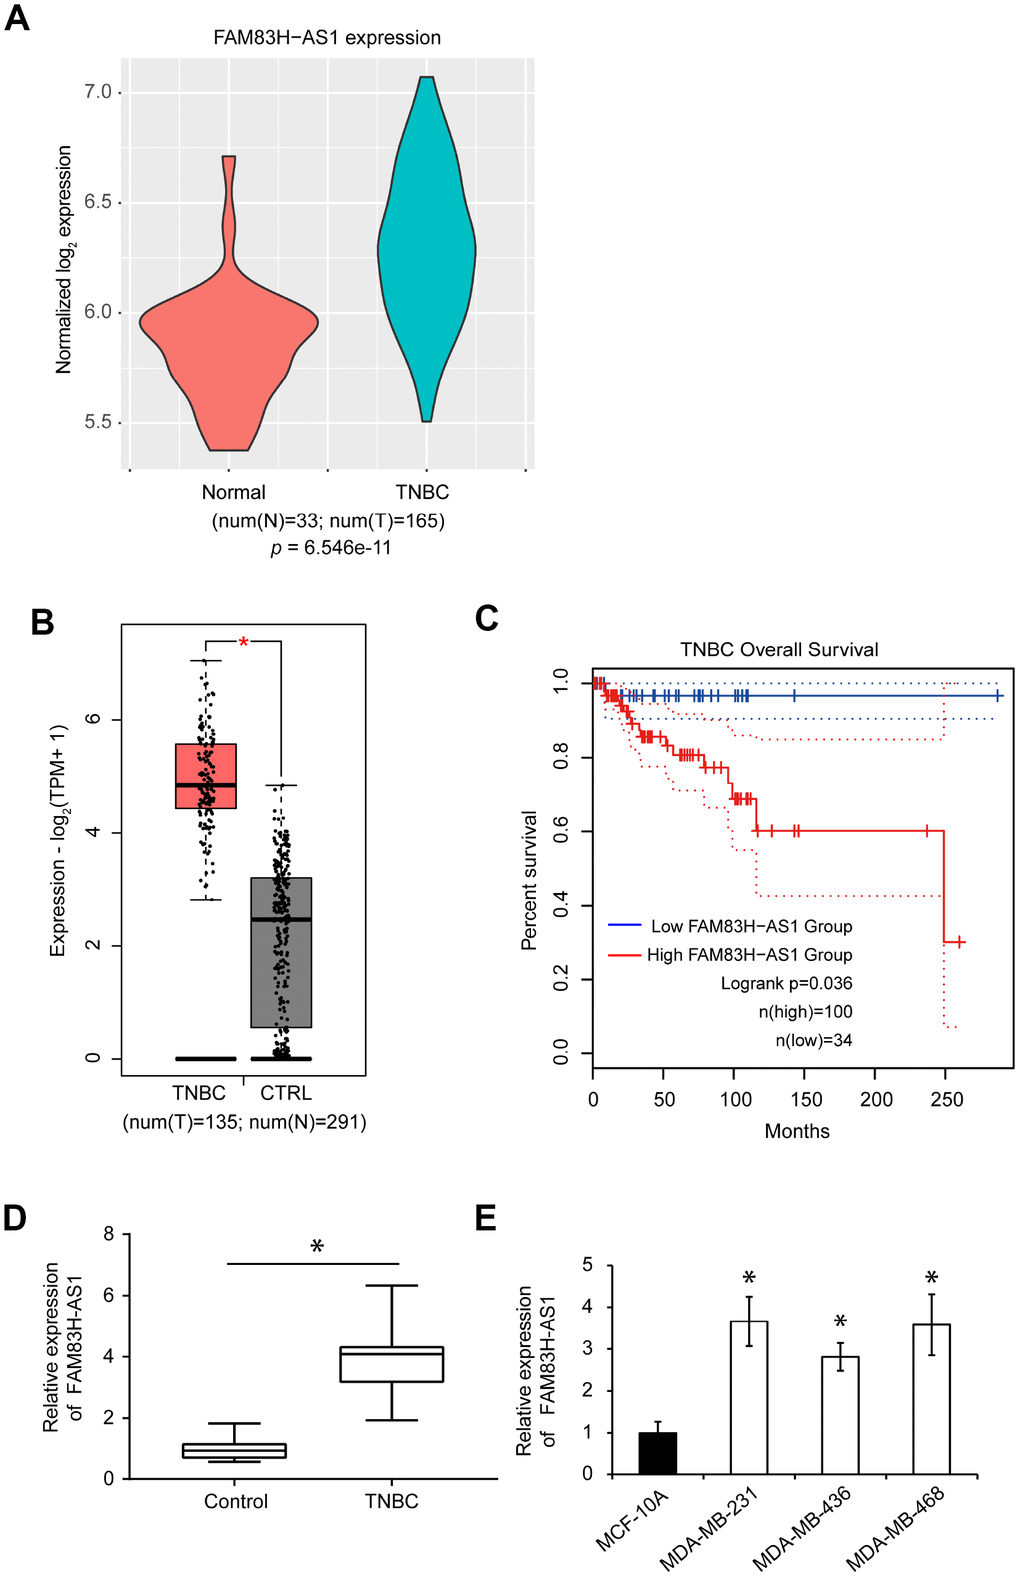 FAM83H-AS1 is upregulated in TNBC tissues and predicts worse overall survival. (A) Expression profiles of FAM83H-AS1 in TNBC and normal breast tissues using the human lncRNA microarray dataset GSE76250. The p value was calculated by Wilcoxon rank-sum test. (B) Expression profiles of FAM83H-AS1 in TNBC and normal breast tissues using the GEPIA 2 dataset. (C) Overall survival rates in low and high FAM83H-AS1 expression groups in TNBC patients using the GEPIA2 dataset. (D) qRT-PCR of FAM83H-AS1 expression in human TNBC and adjacent control tissues. (E) qRT-PCR of FAM83H-AS1 mRNA in MDA-MB-231, MDA-MB-436, MDA-MB-468, and MCF-10A cells.